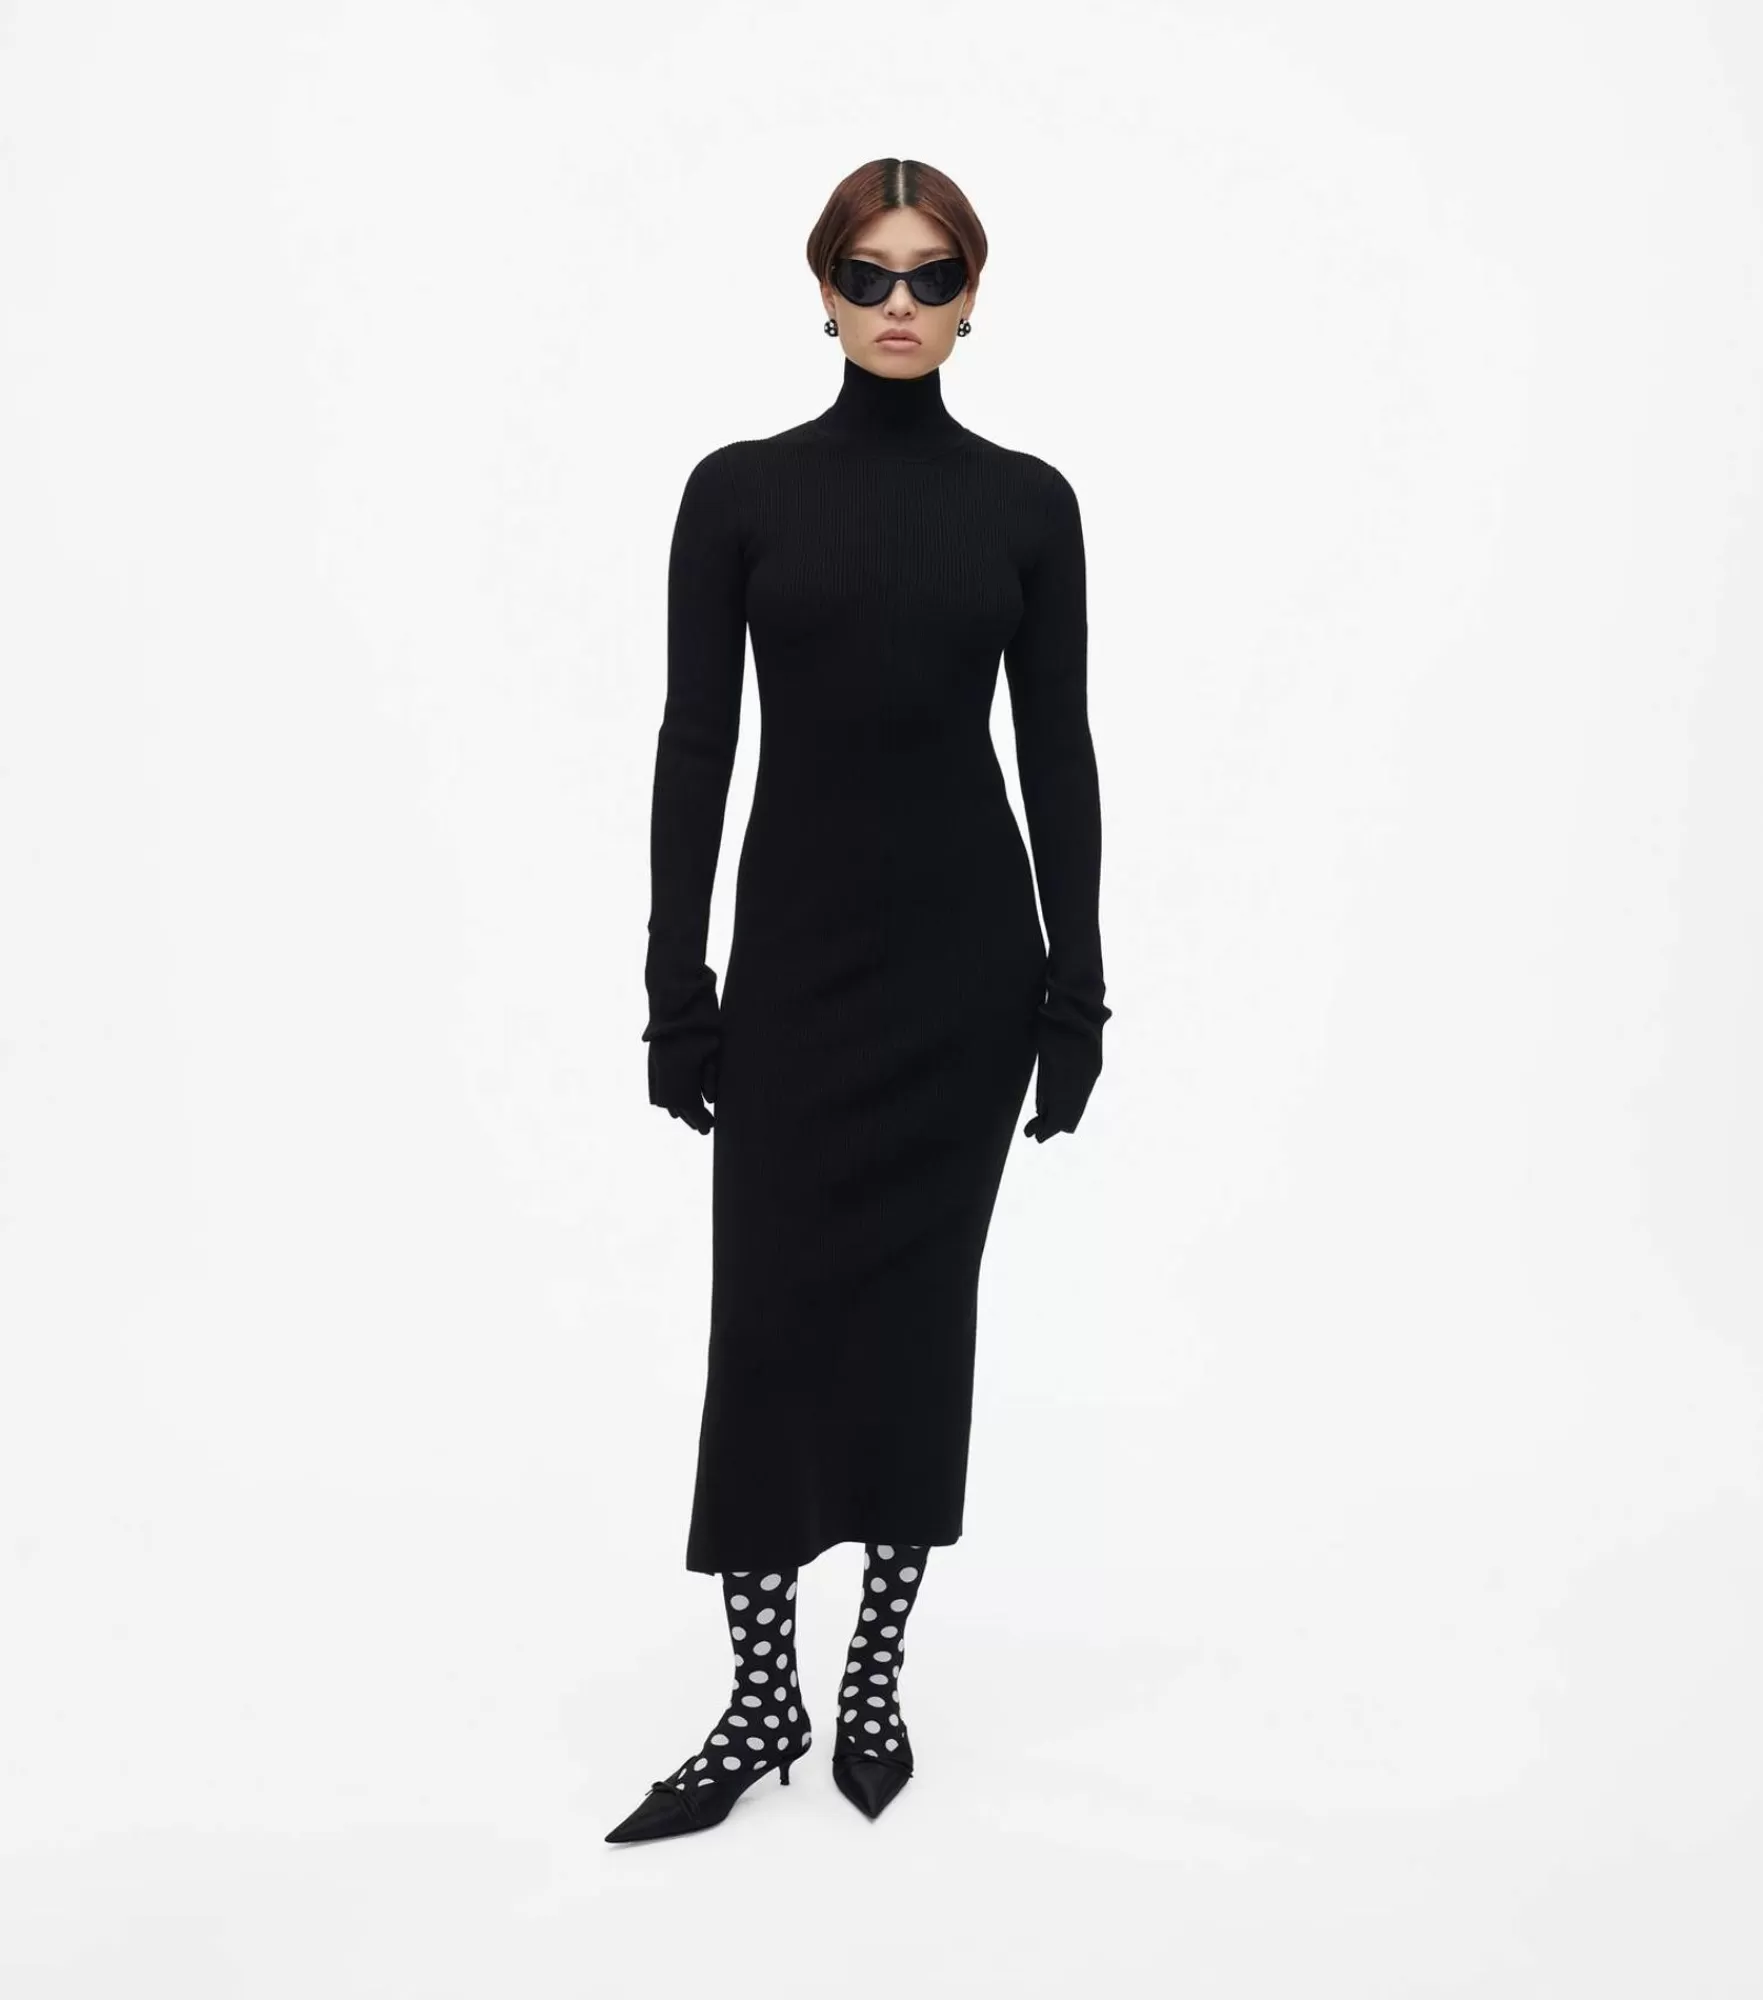 Marc Jacobs The Reversible Knit Dress | Robes